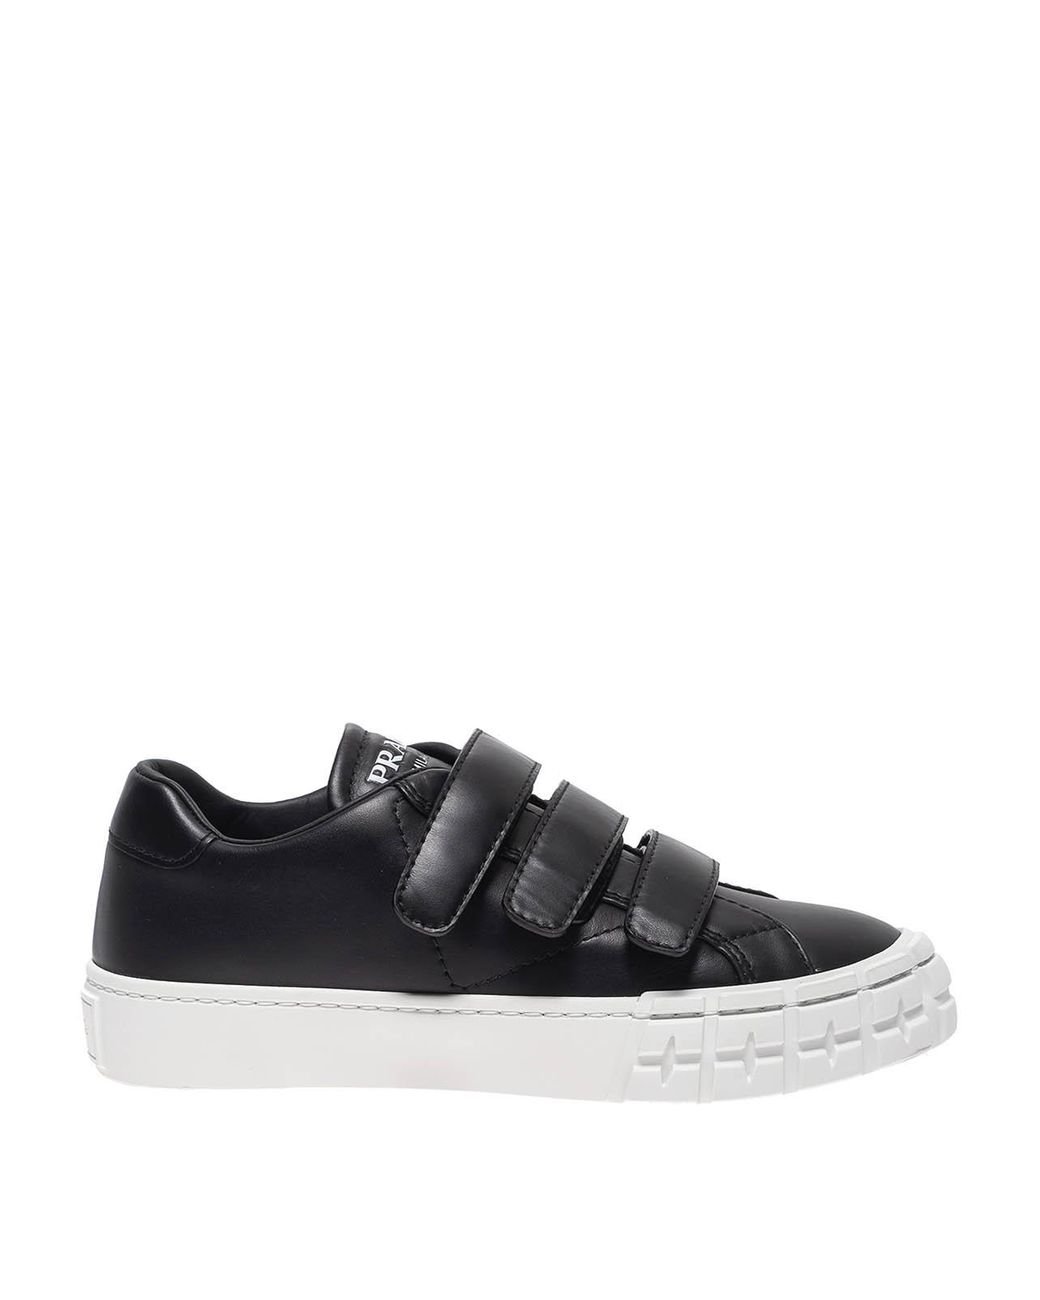 Prada Leather Sneakers With Velcro Straps in Black - Lyst